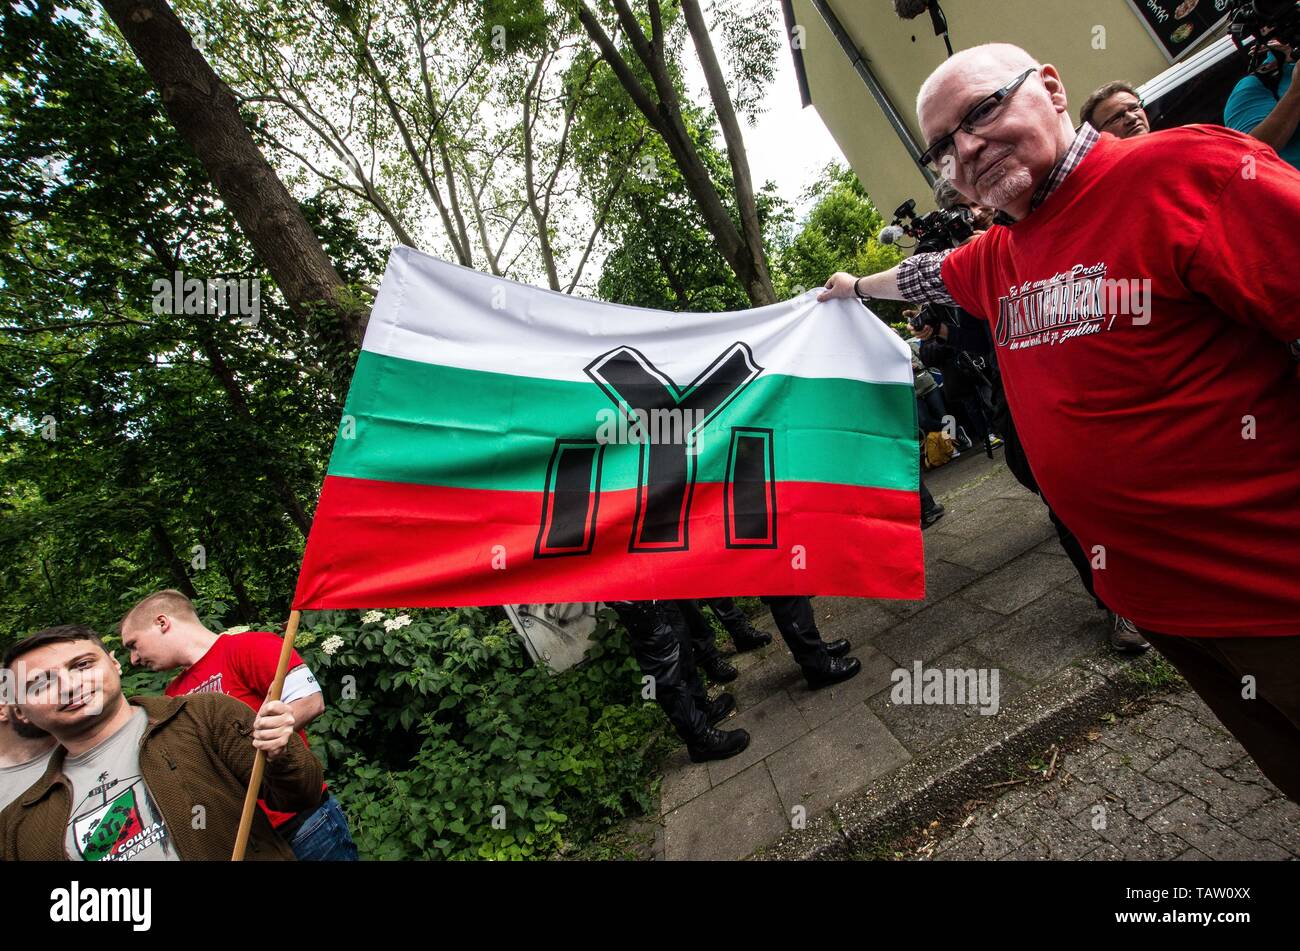 Dortmund, Nordrhein Westfalen, Germany. 25th May, 2019. The flag of the Bulgarian BNS Bulgarski Nationalen Sajuz Bulgarische Nationalbund neonazi group as seen at a rally in Dortmund, Germany. Prior to the European Elections, the neonazi party Die Rechte (The Right) organized a rally in the German city of Dortmund to promote their candidate, the incarcerated Holocaust denier Ursula Haverbeck. The demonstration and march were organized by prominent local political figure and neonazi activist Michael Brueck (Michael BrÃ¼ck) who enlisted the help of not only German neonazis, but also assistance Stock Photo